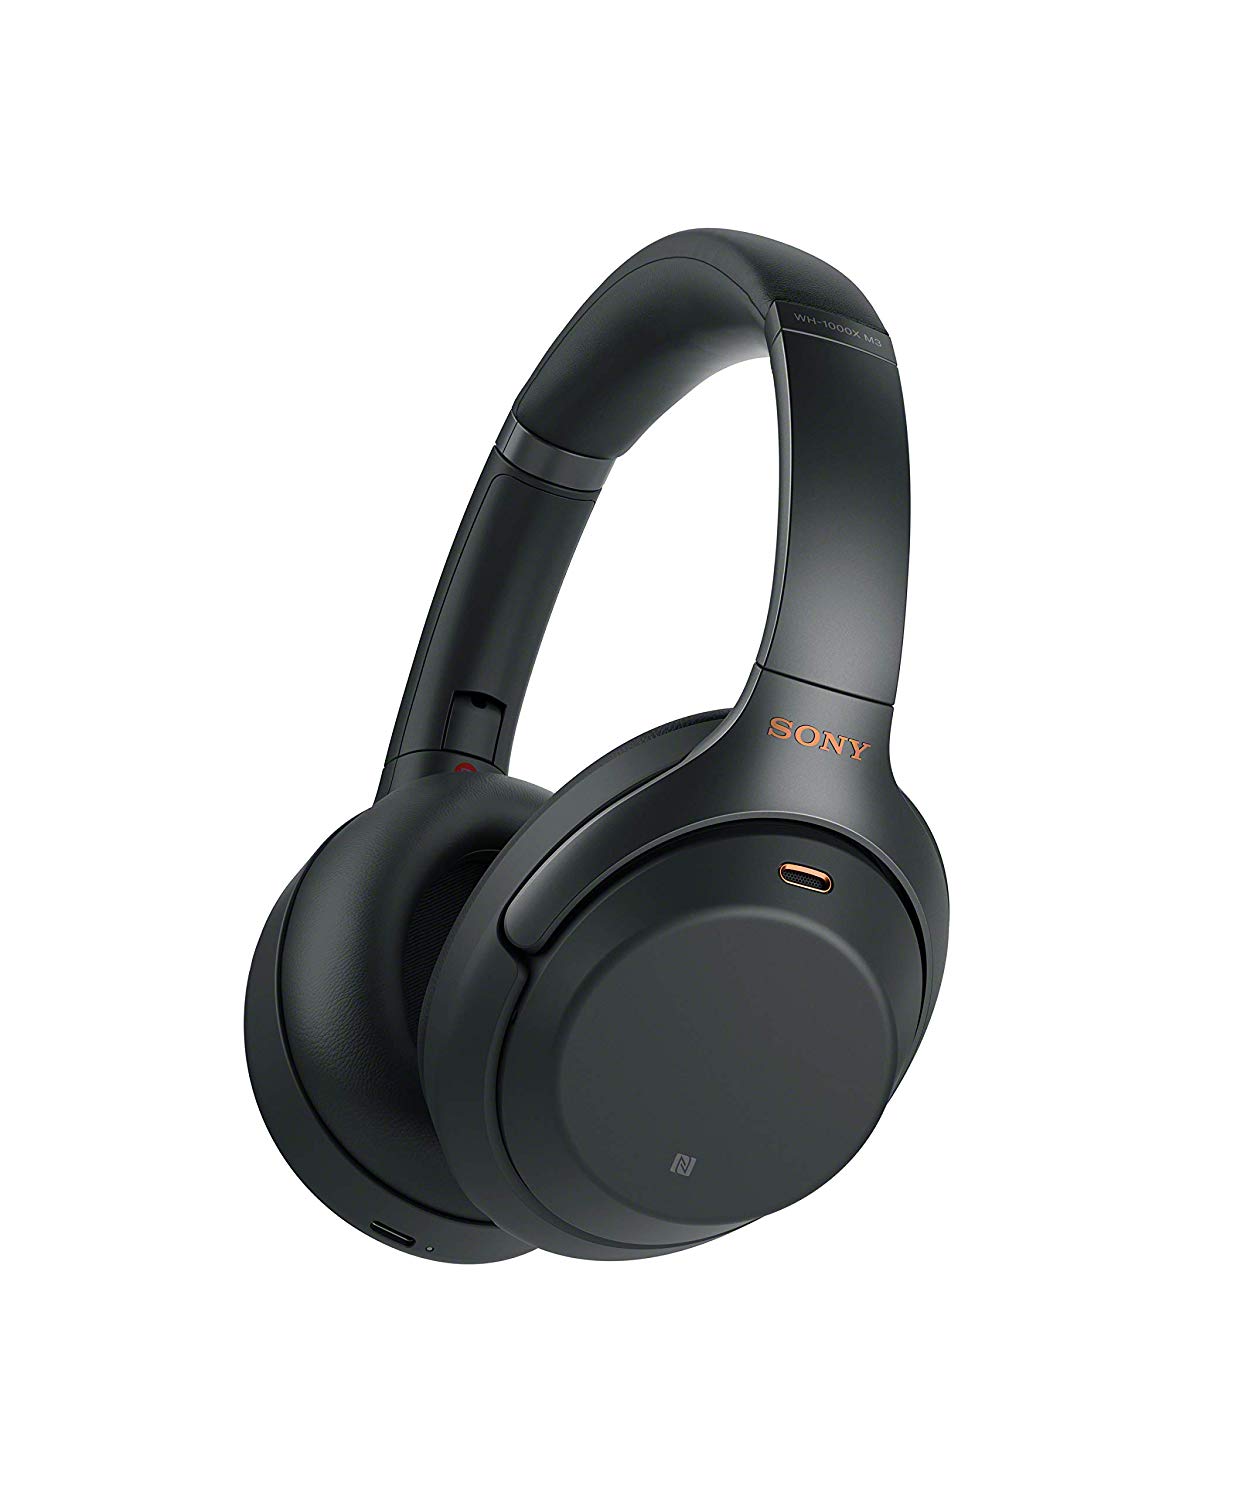 Get $52 Off Sony&#039;s WH1000XM3 Wireless Noise Cancelling Headphones [Deal]